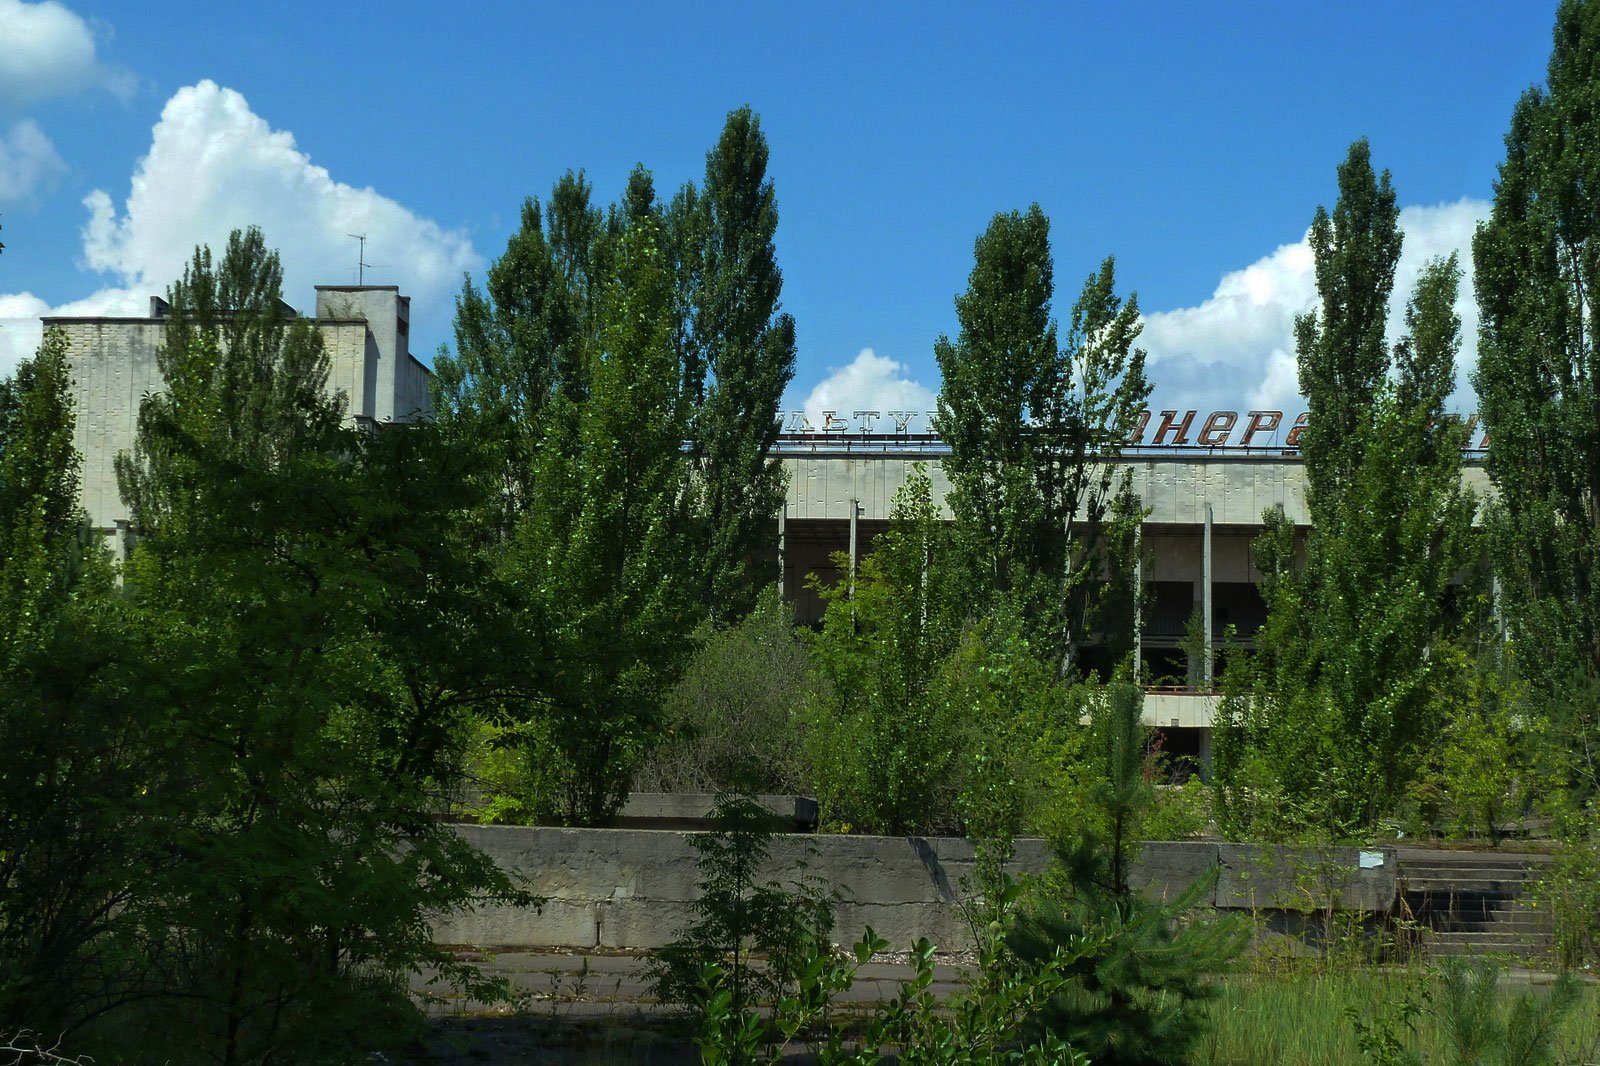 Palace of Culture Energetik, Chernobyl